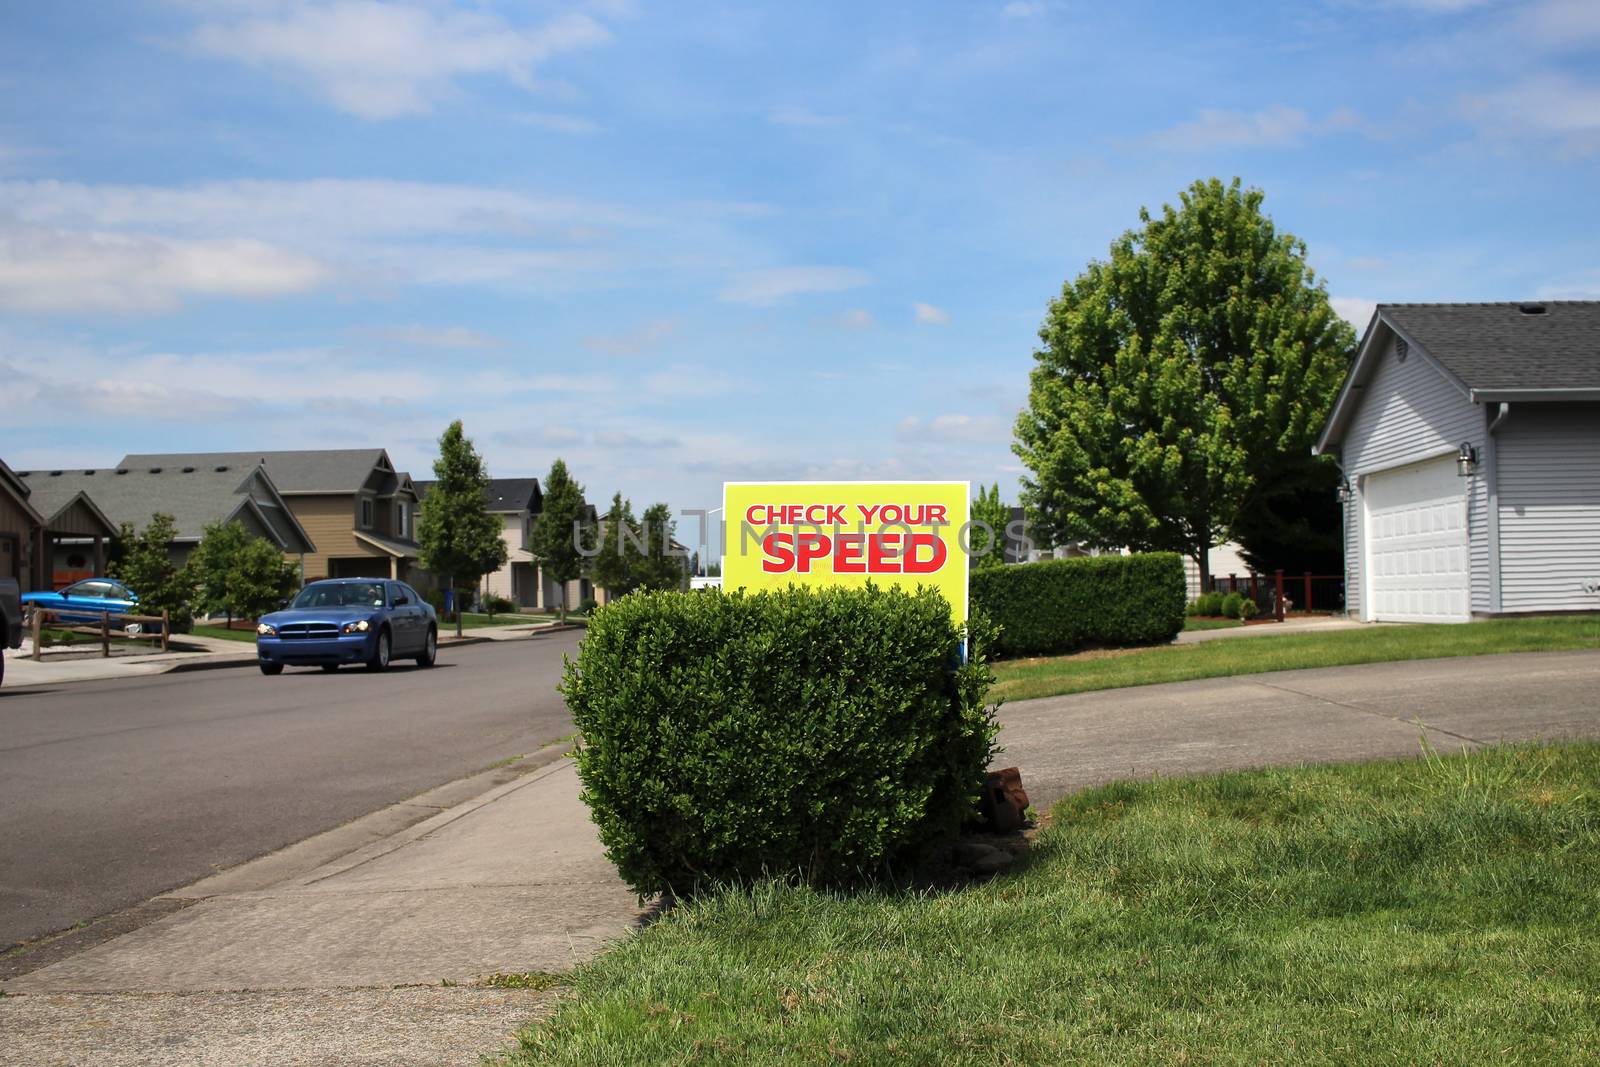 Check Your Speed sign in neighborhood by ziss